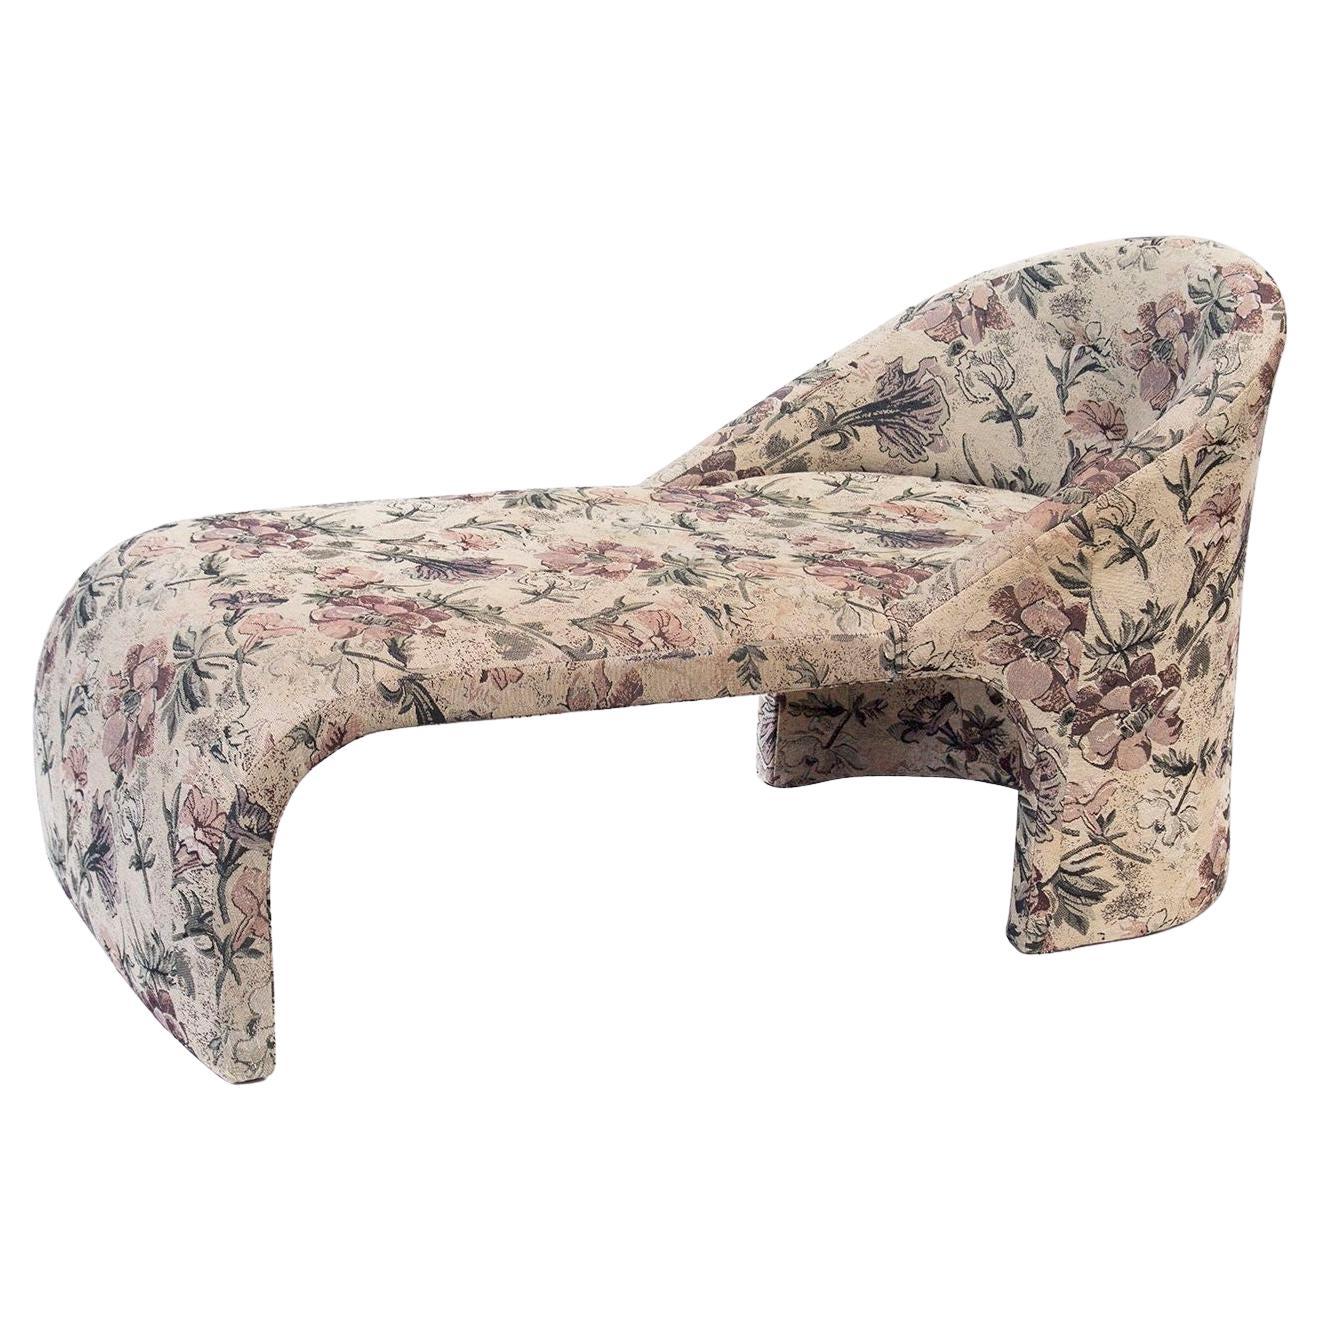 Sculptural Kagan Style Chaise Lounge in Compact Size For Sale